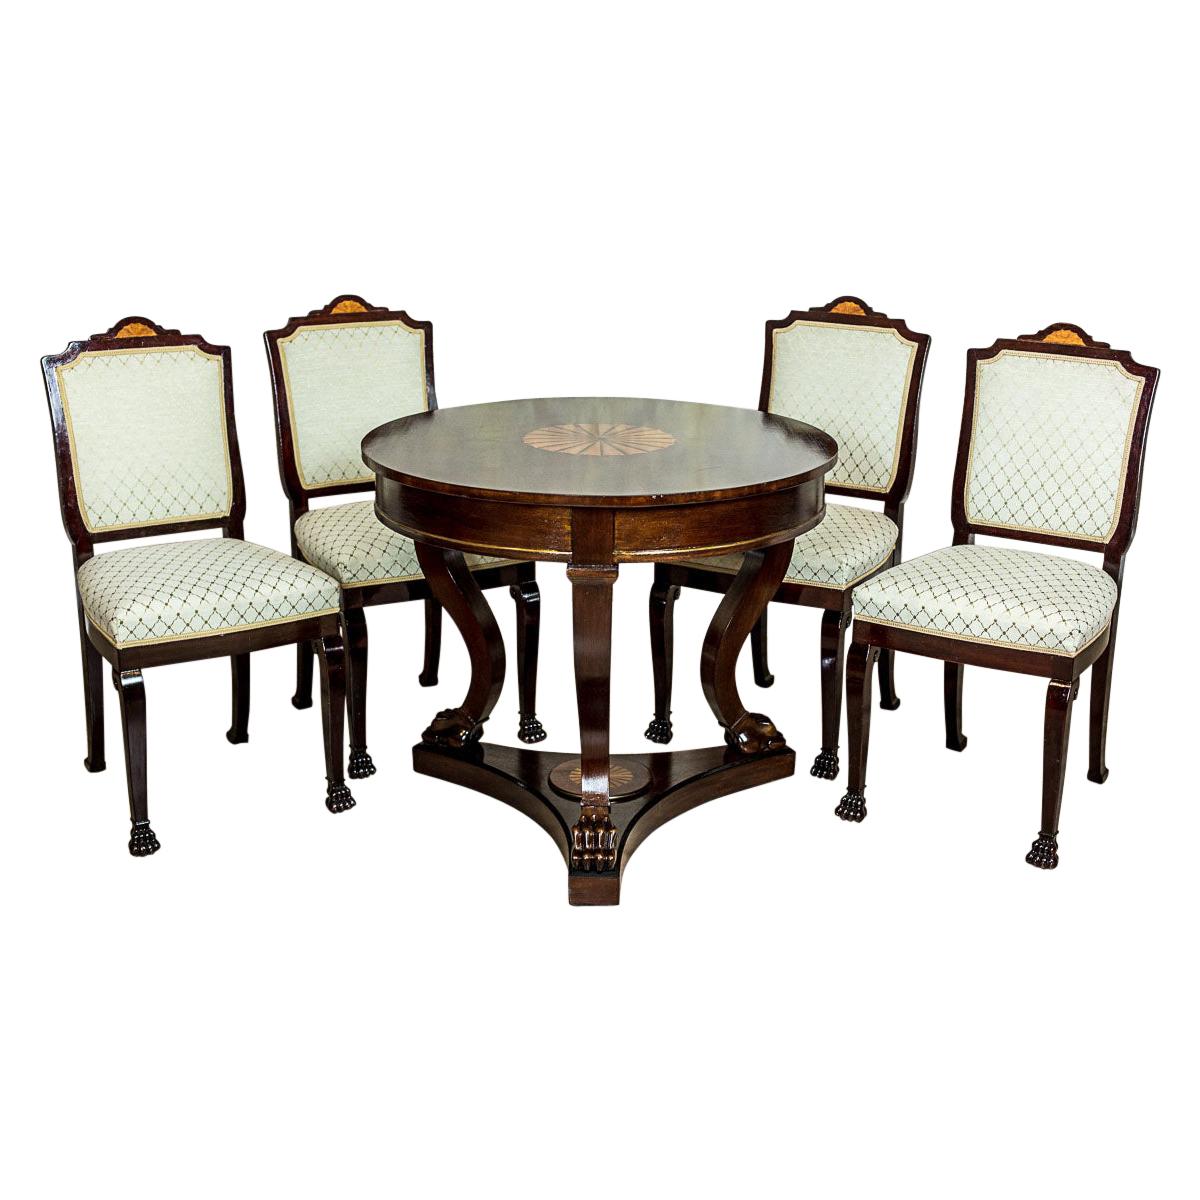 20th Century Stylized, Round Table with Upholstered Chairs For Sale